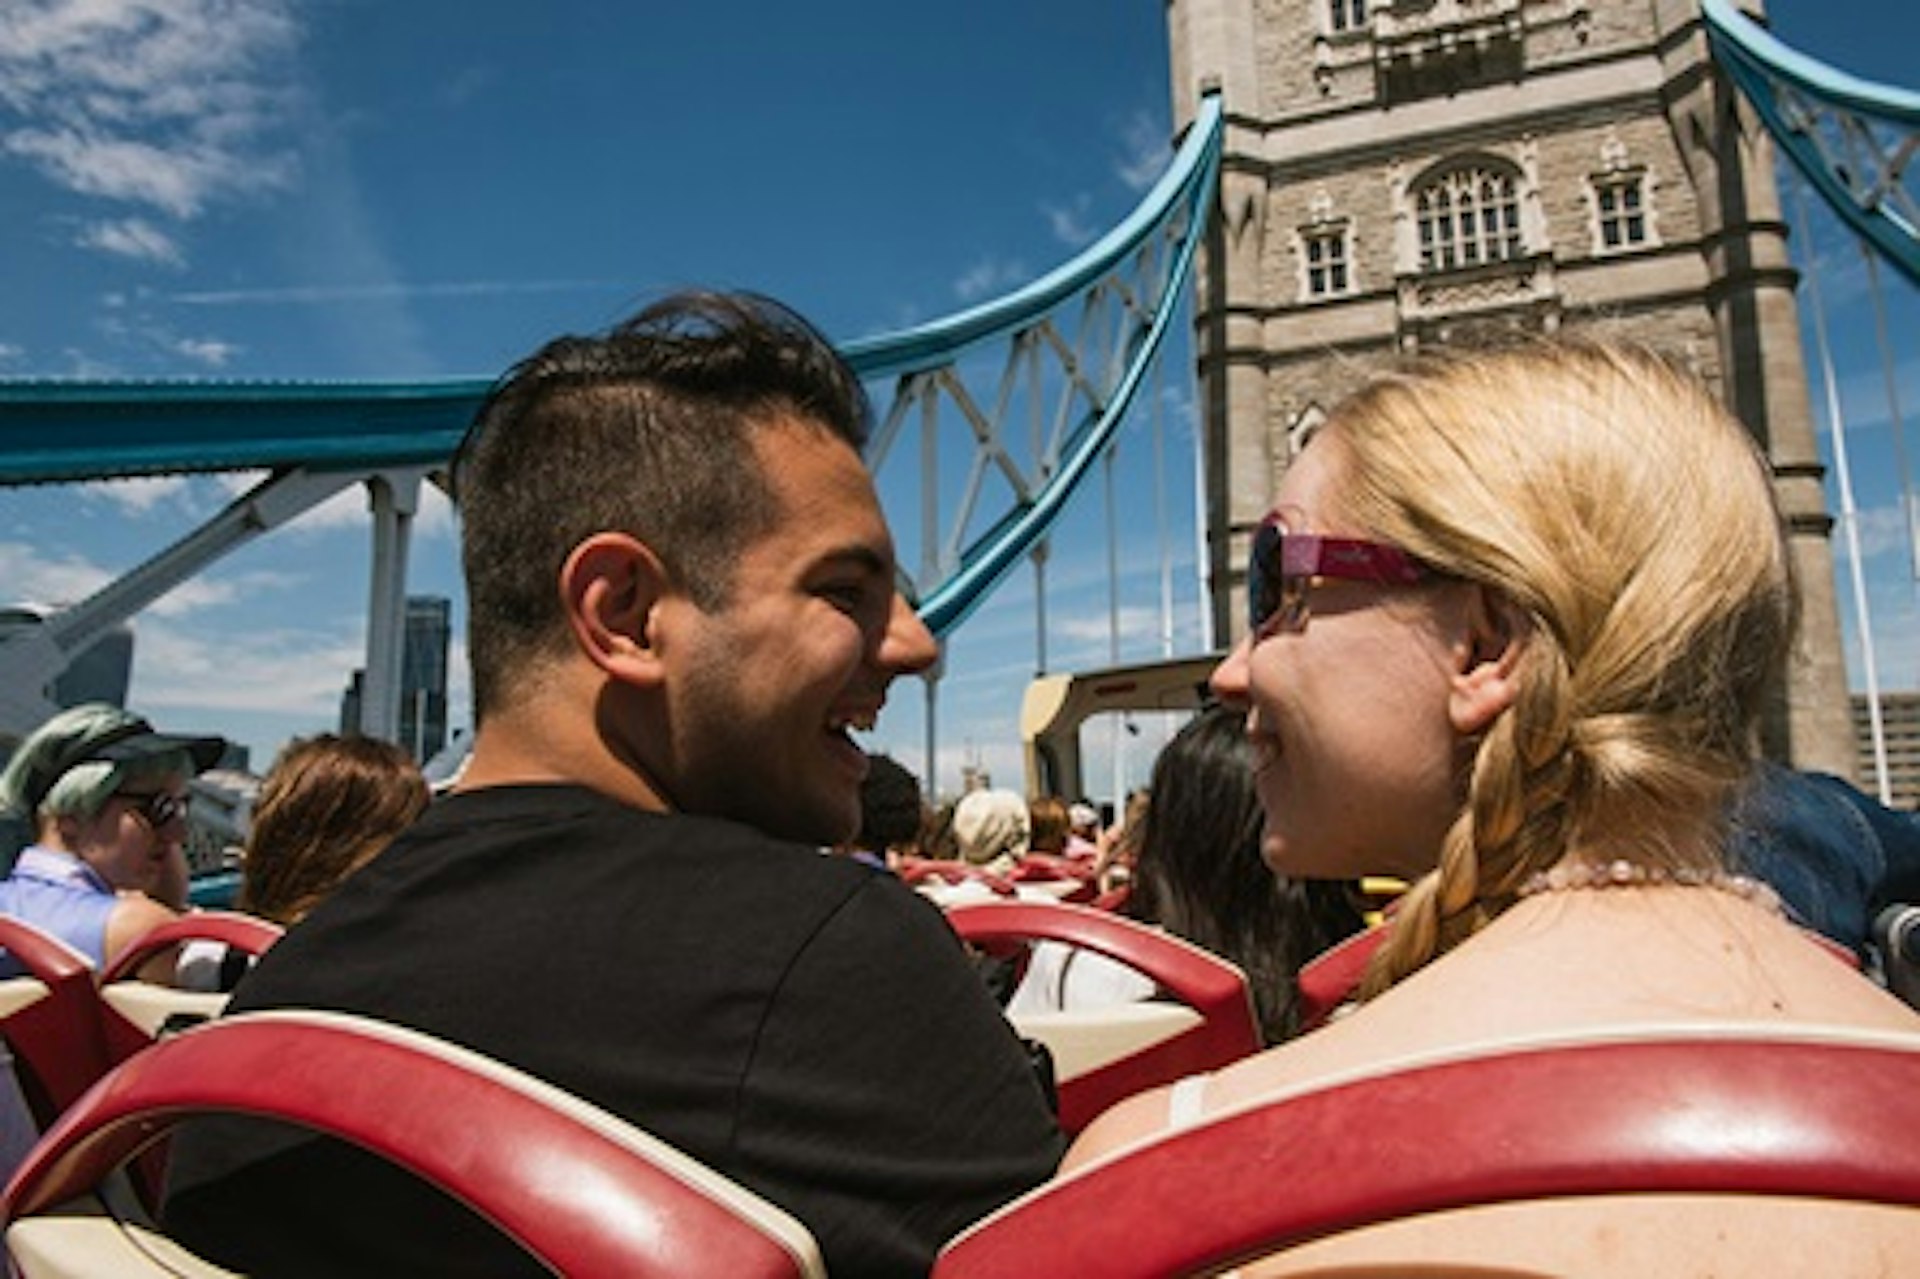 Explore London with Hop-On, Hop-Off Sightseeing Bus Tour and River Cruise for Two 4